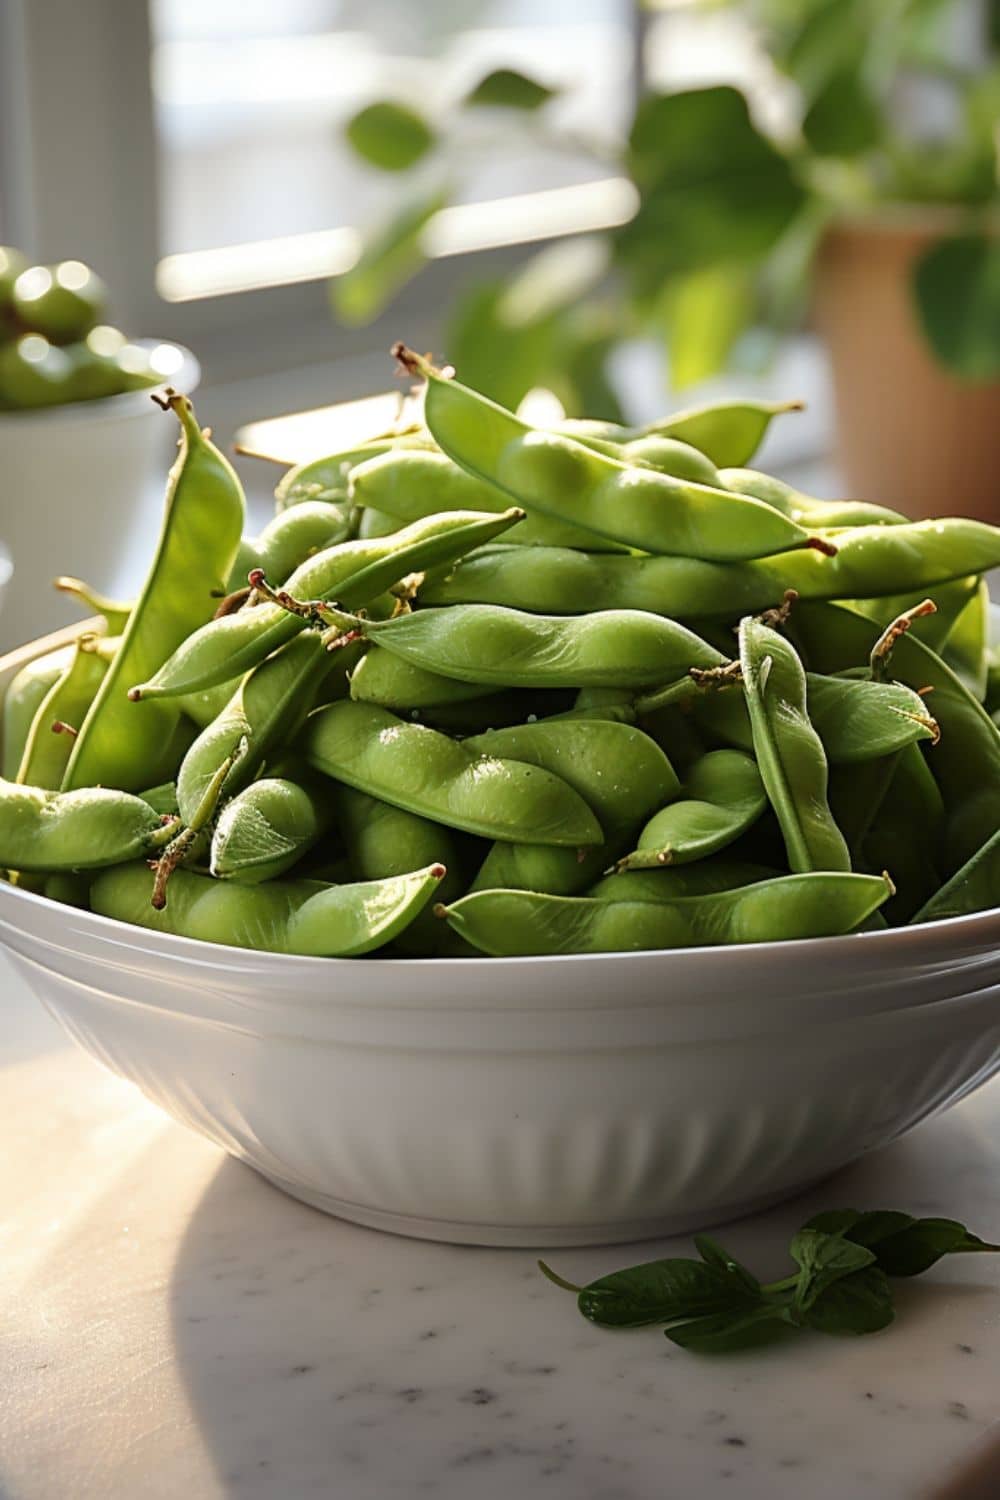 Edamame unshelled in a bowl